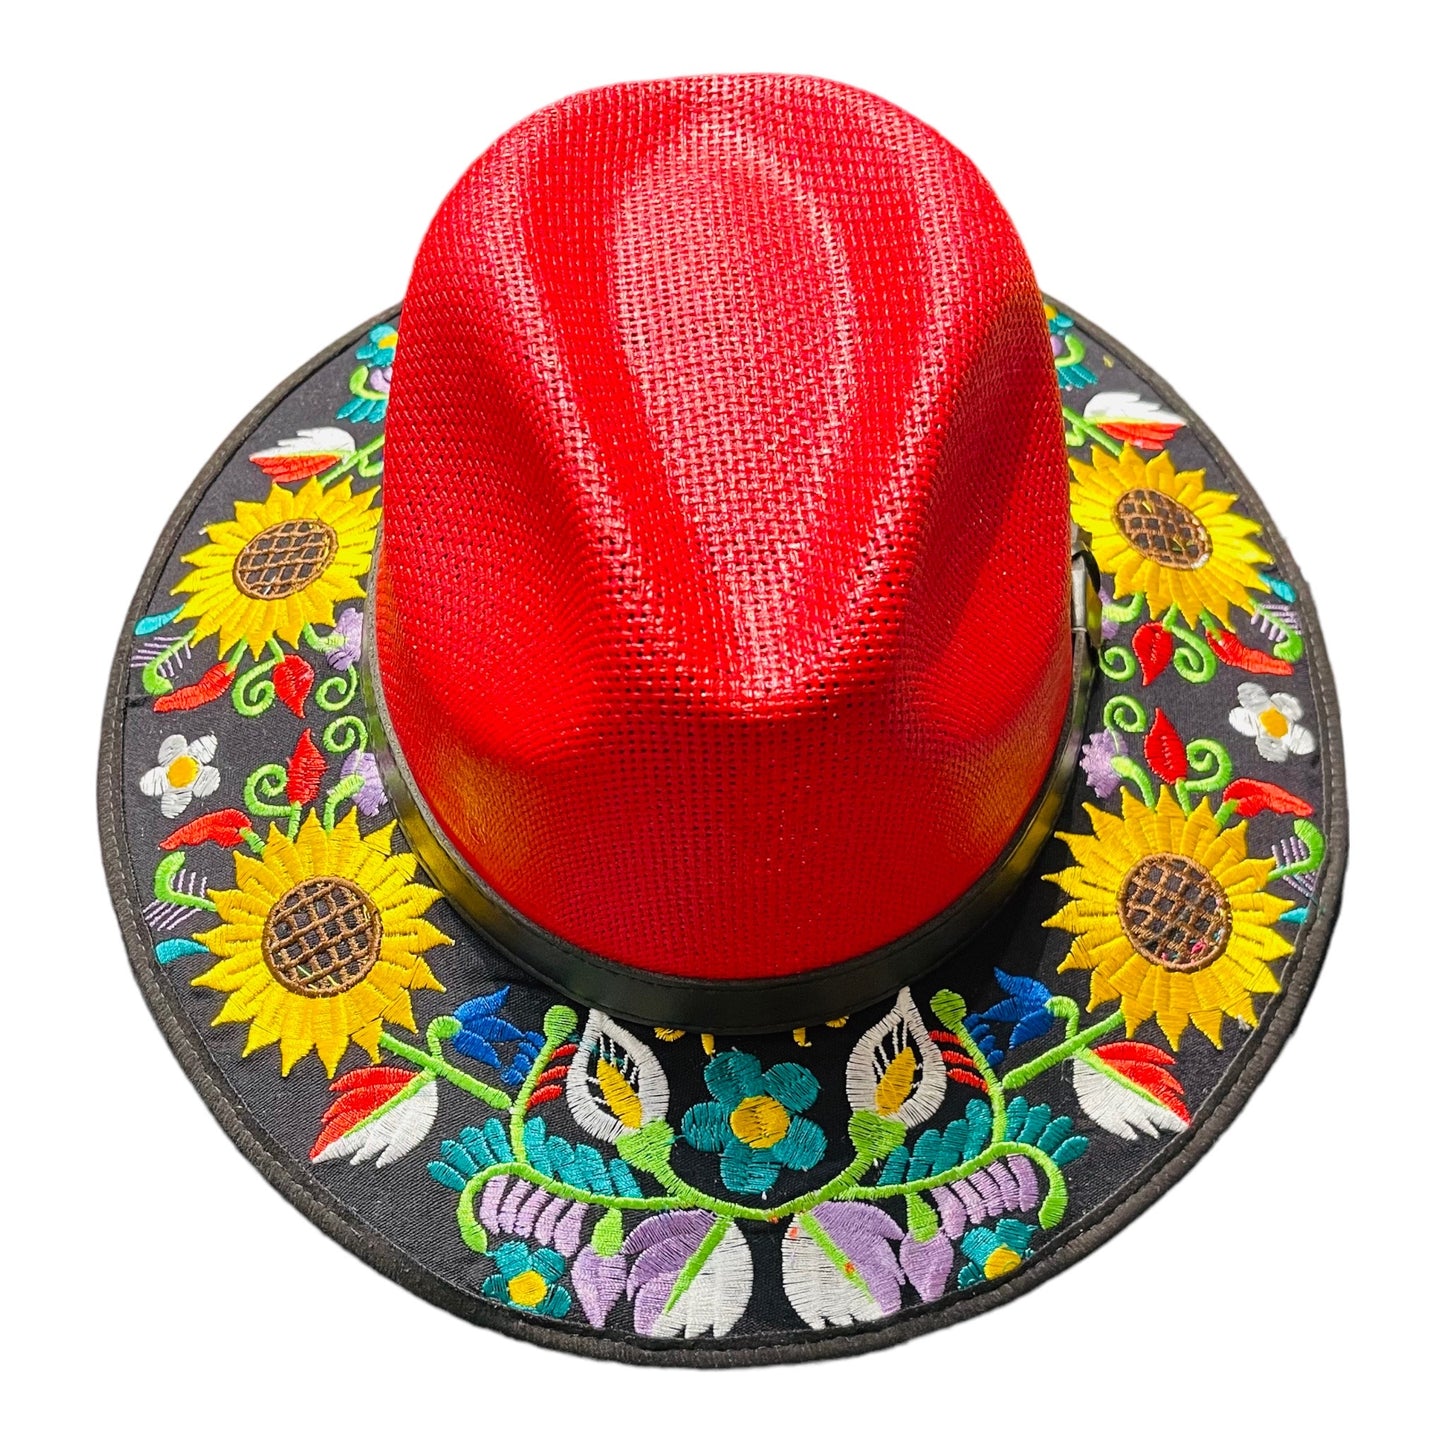 Hand embroidered red brim hat, the perfect accessory to add some fun and style to any outfit. With yellow daisies, purple flowers and green leaves around the hat as multicultural ornaments. 